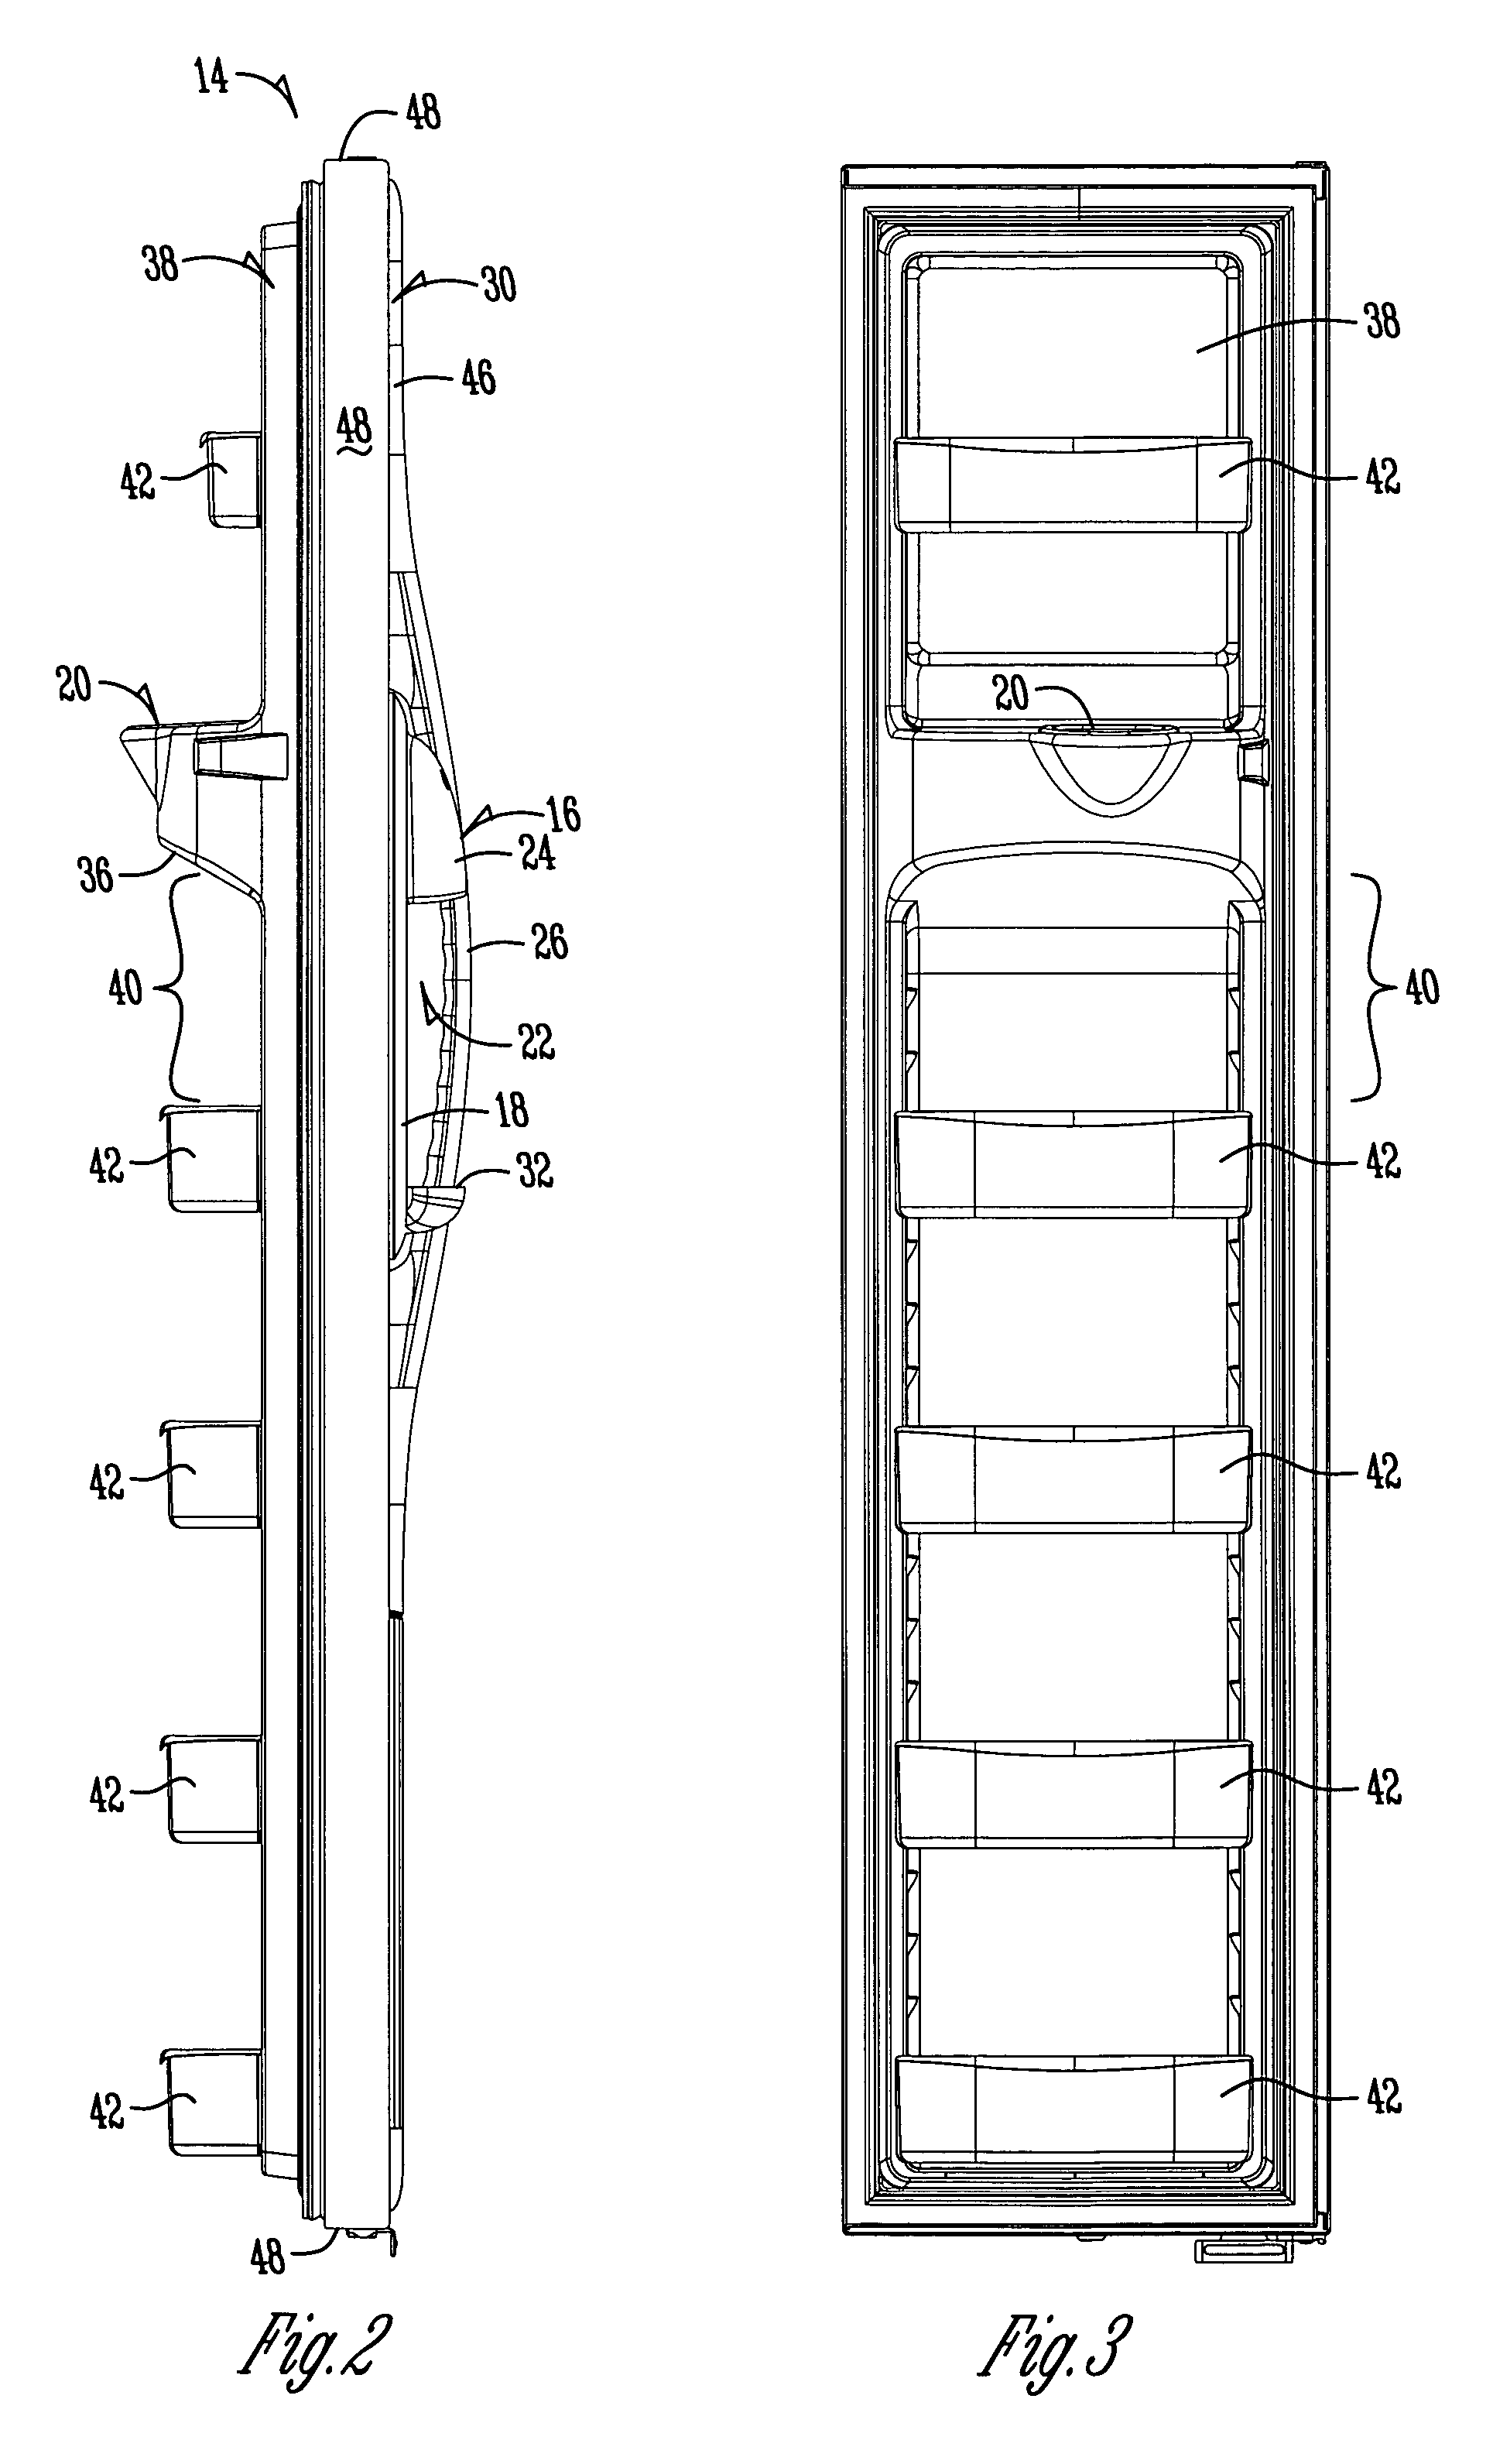 Refrigerator with improved water and ice dispenser